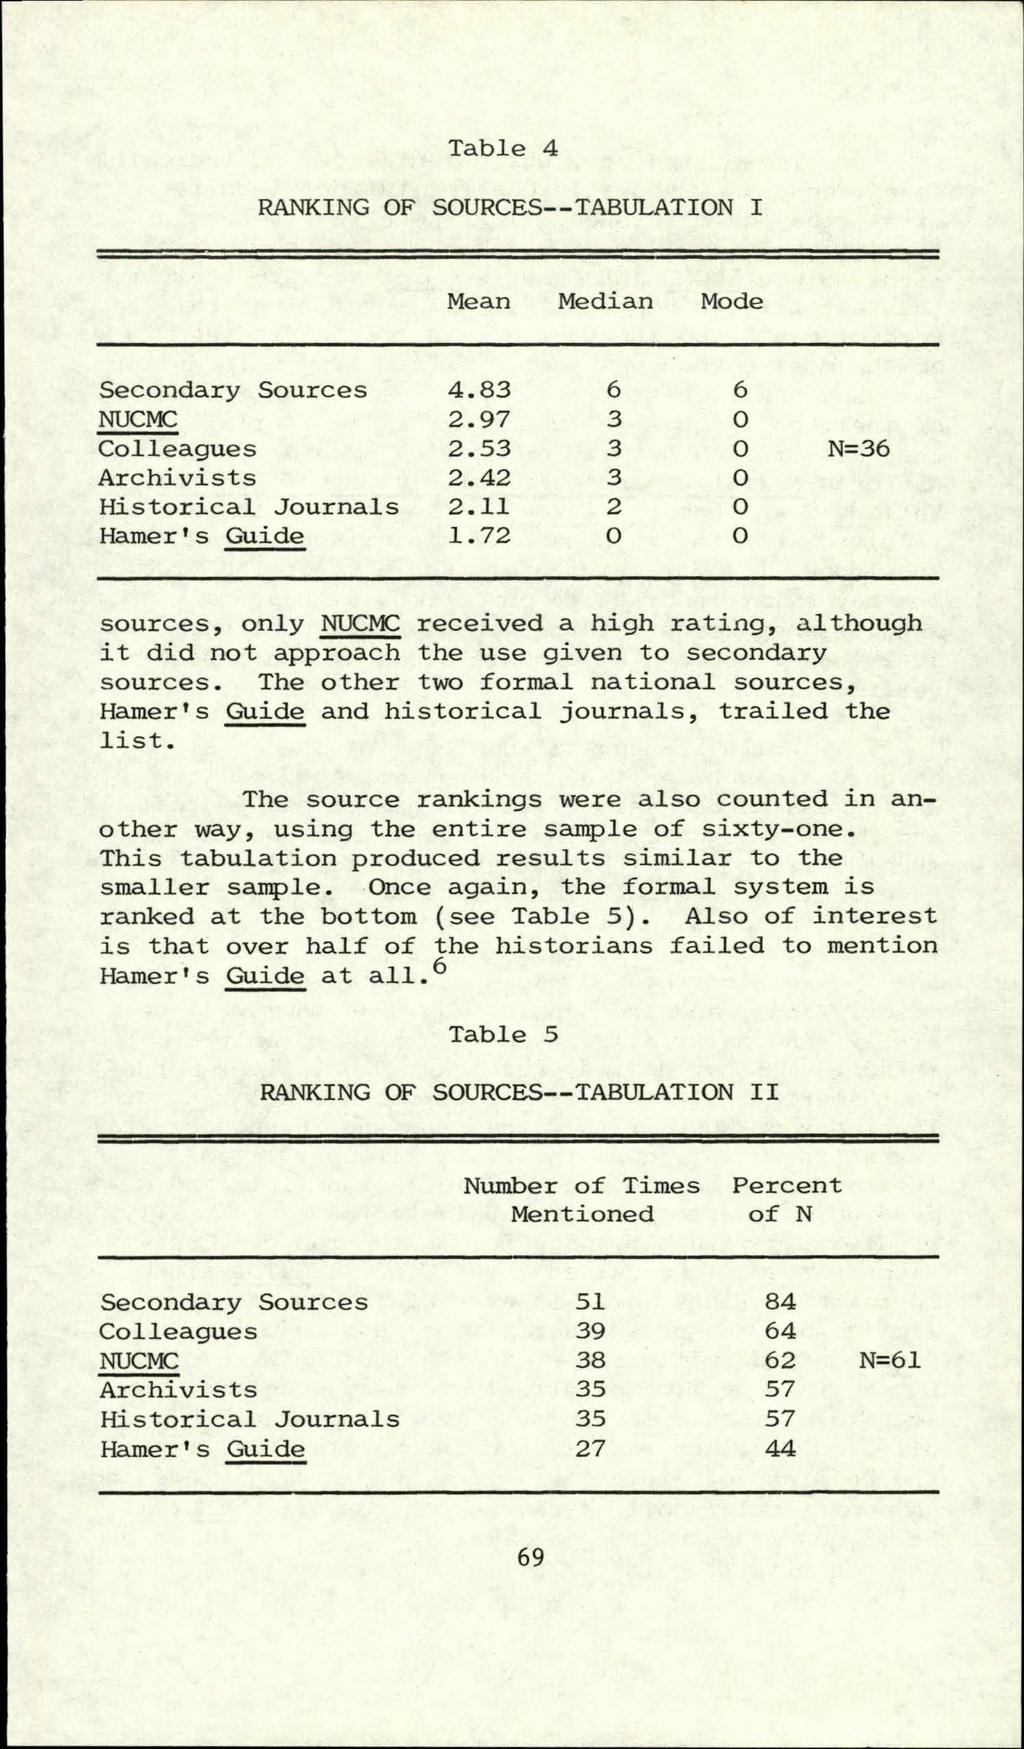 Georgia Archive, Vol. 5 [1977], No. 1, Art. 7 Table 4 RANKI NG OF SOURCES--TABULATION I Mean Median Mode Secondary Sources 4.83 6 6 NUCMC 2.97 3 0 Colleagues 2.53 3 0 N=36 Archivists 2.